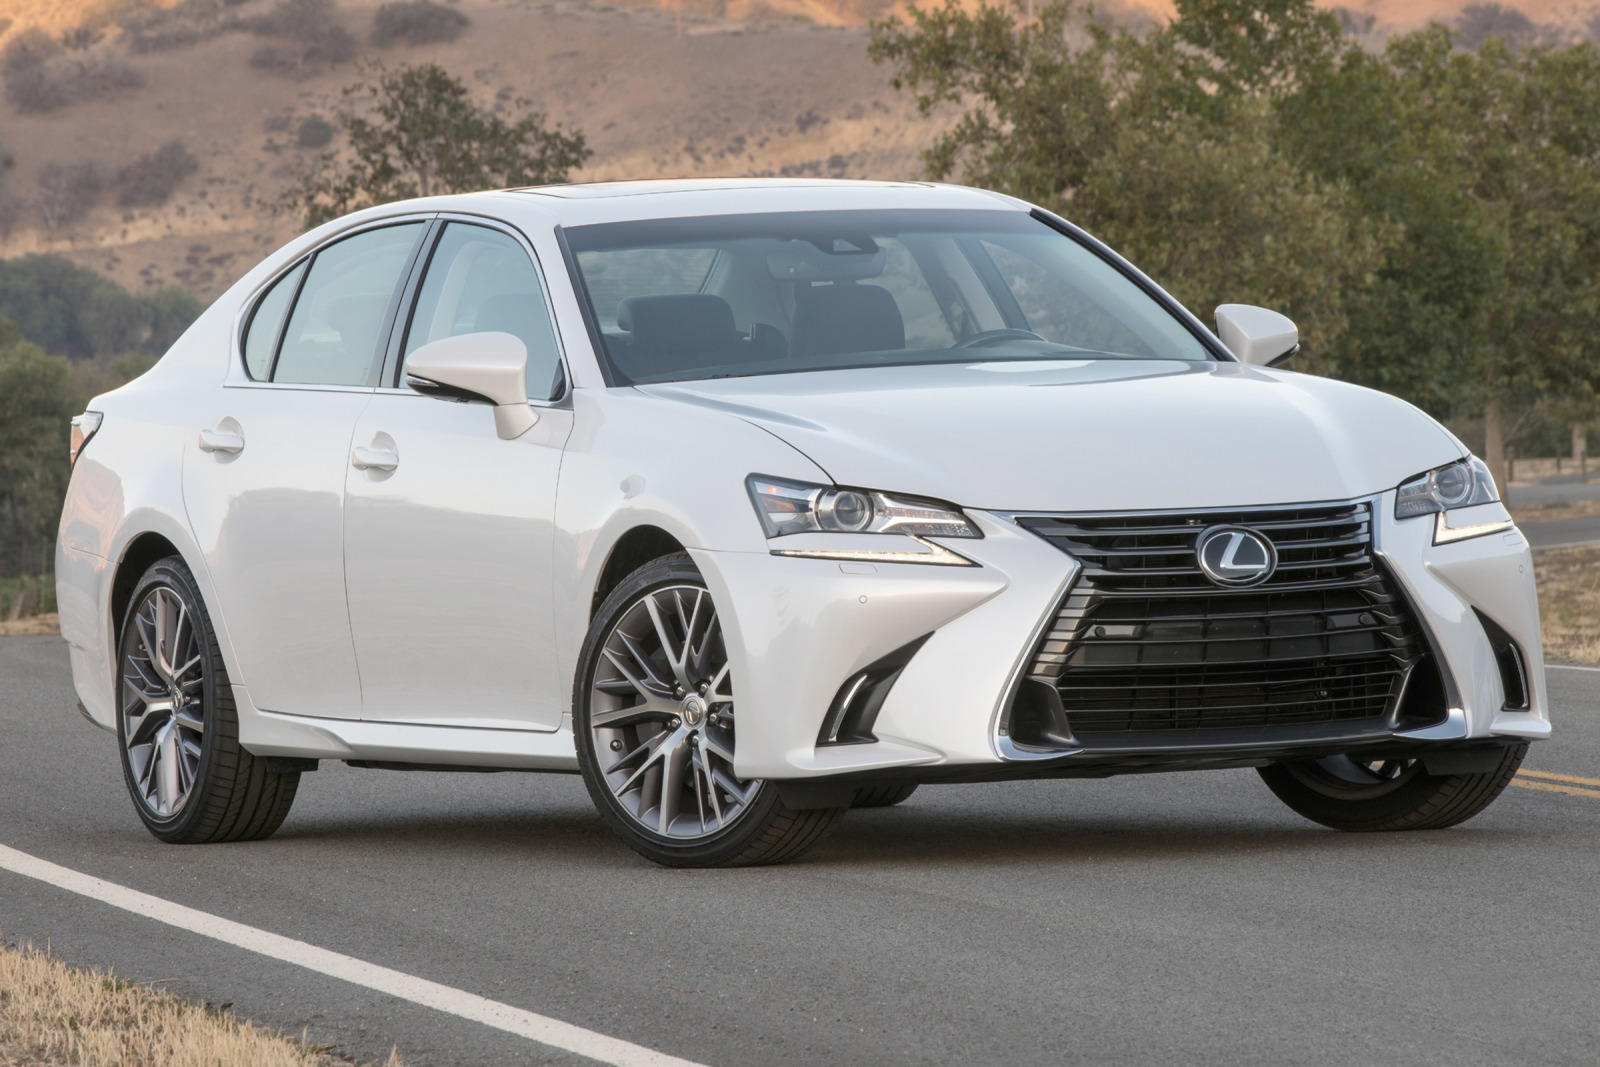 Lexus Gs 350 F Sport For Sale Used Gs Gs 350 F Sport Near You In The Us Carbuzz